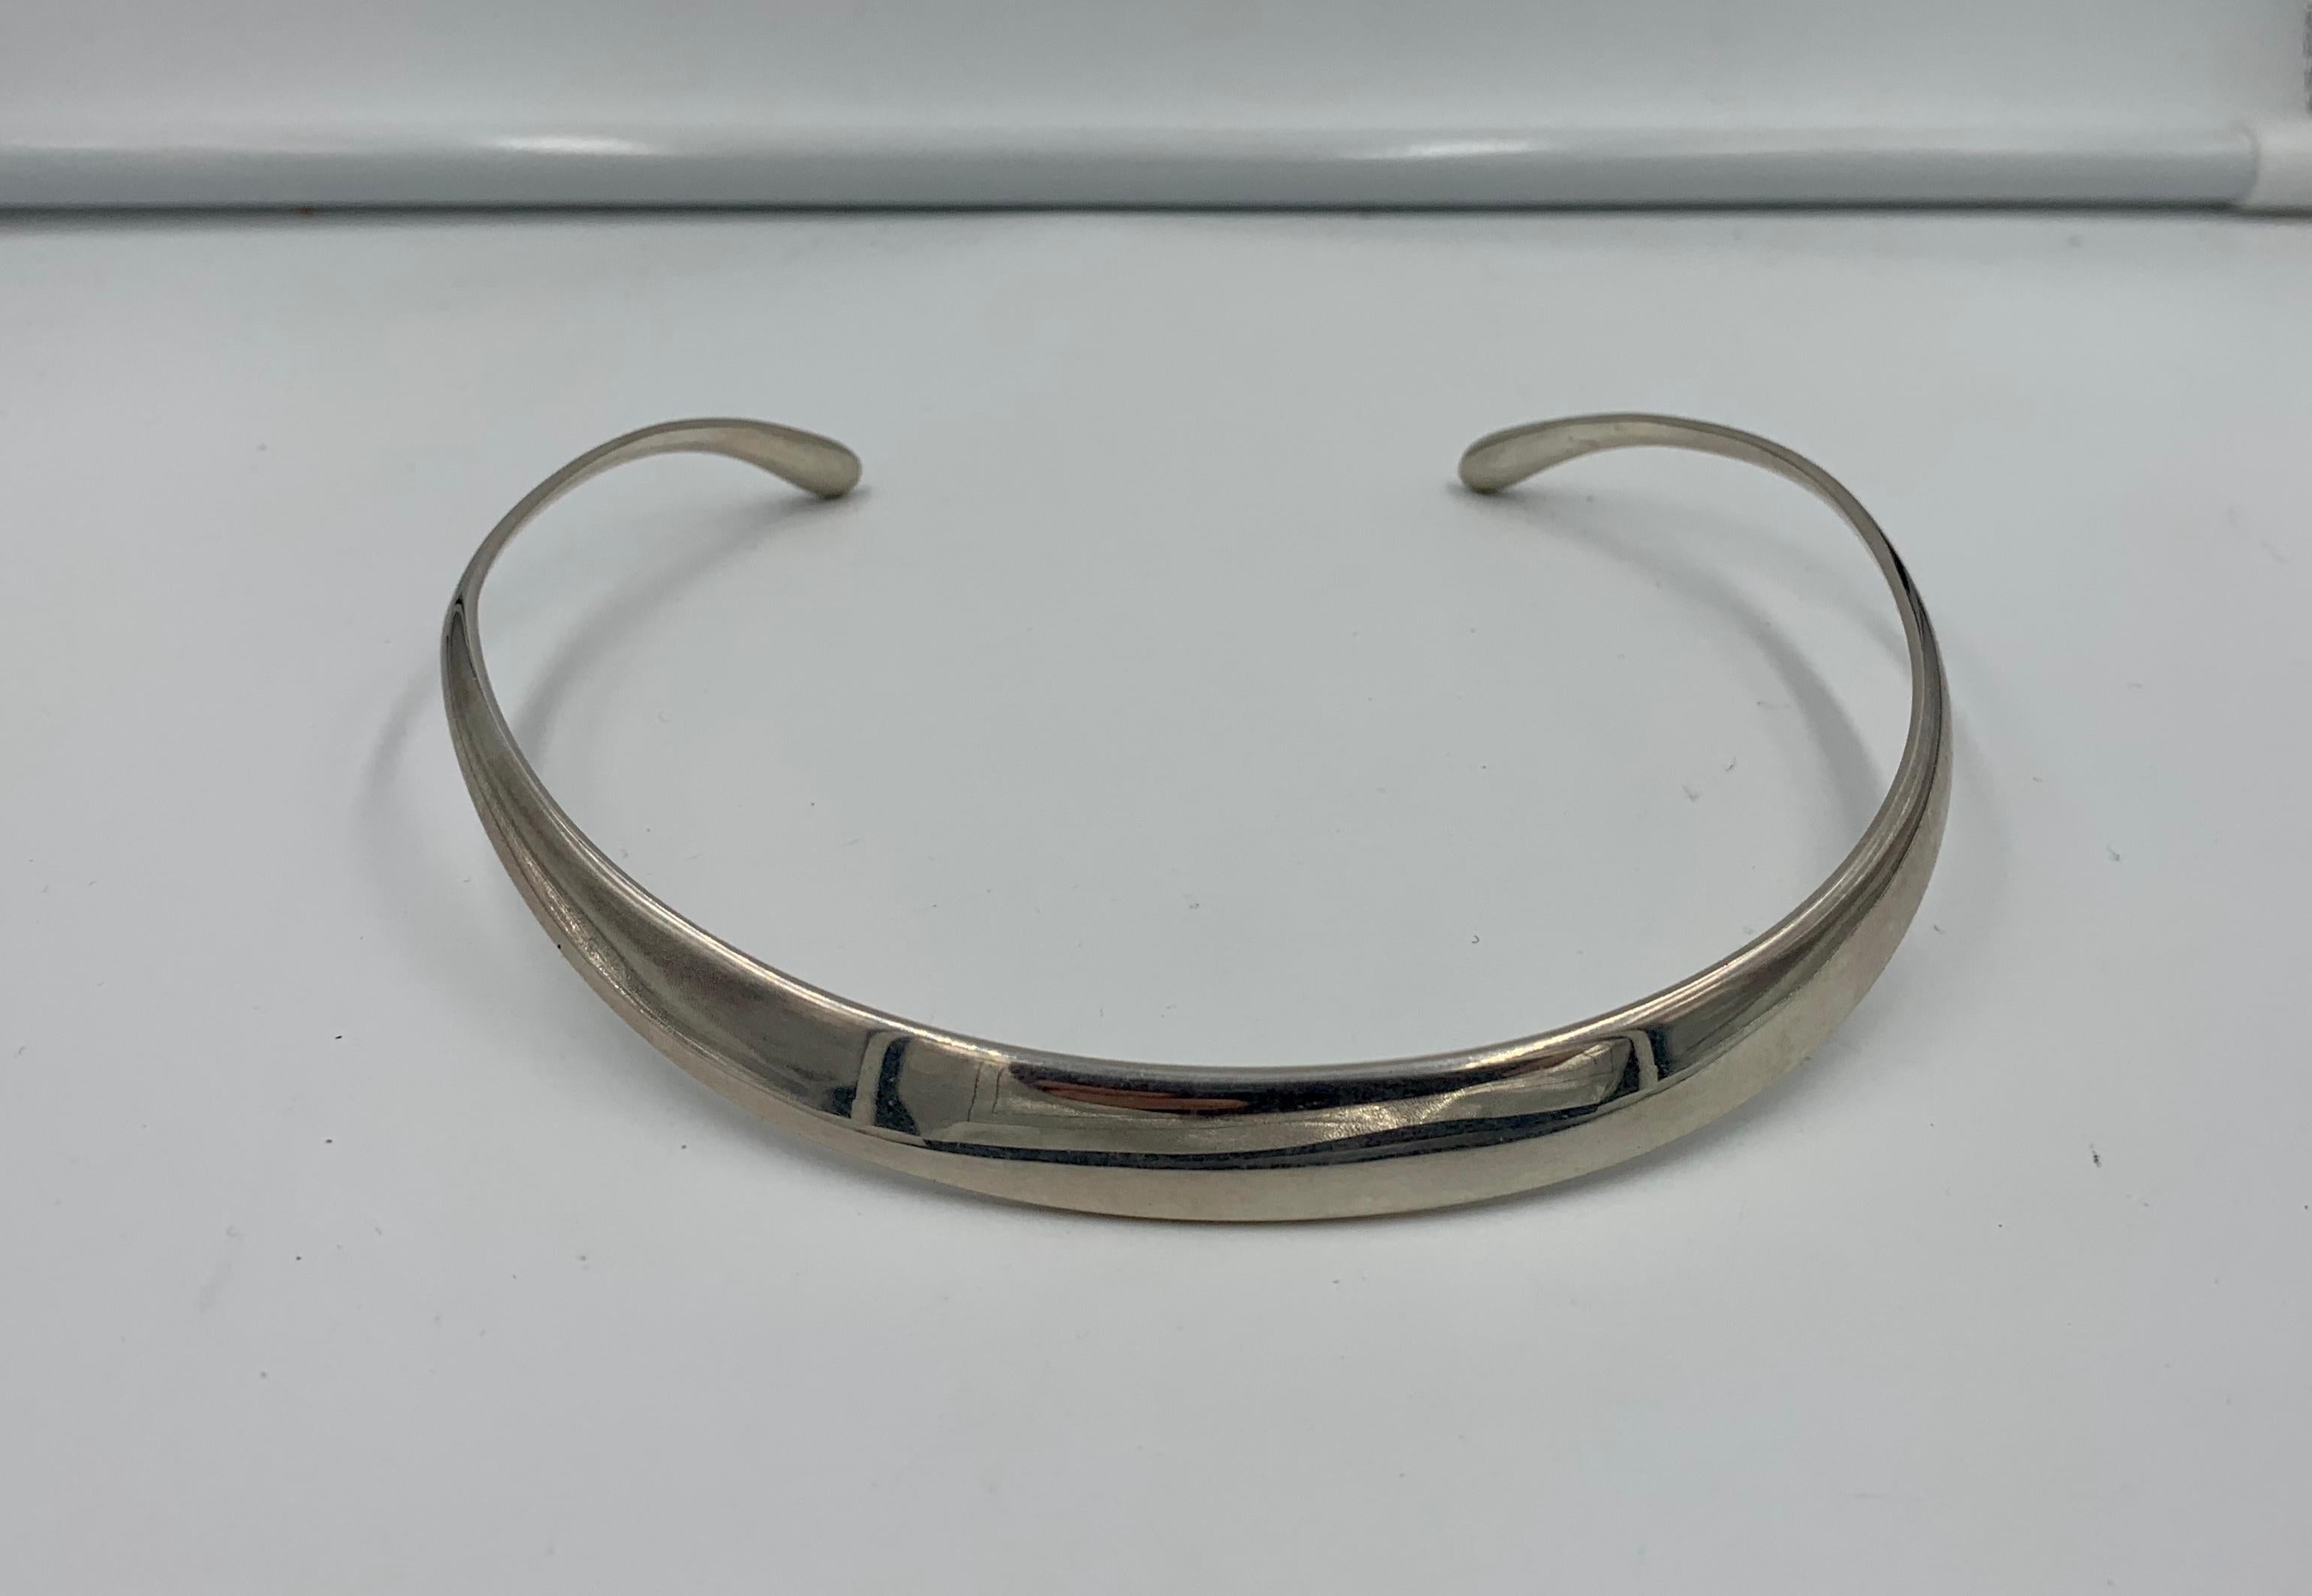 A CLASSIC DAVID ANDERSEN, STERLING SILVER MID-CENTURY MODERNIST COLLAR NECKLACE.
This wonderful sculptural collar necklace is one of the icons of Mid-Century Modern silver jewelry.
The stunning and rare necklace was made by David Andersen in Norway.